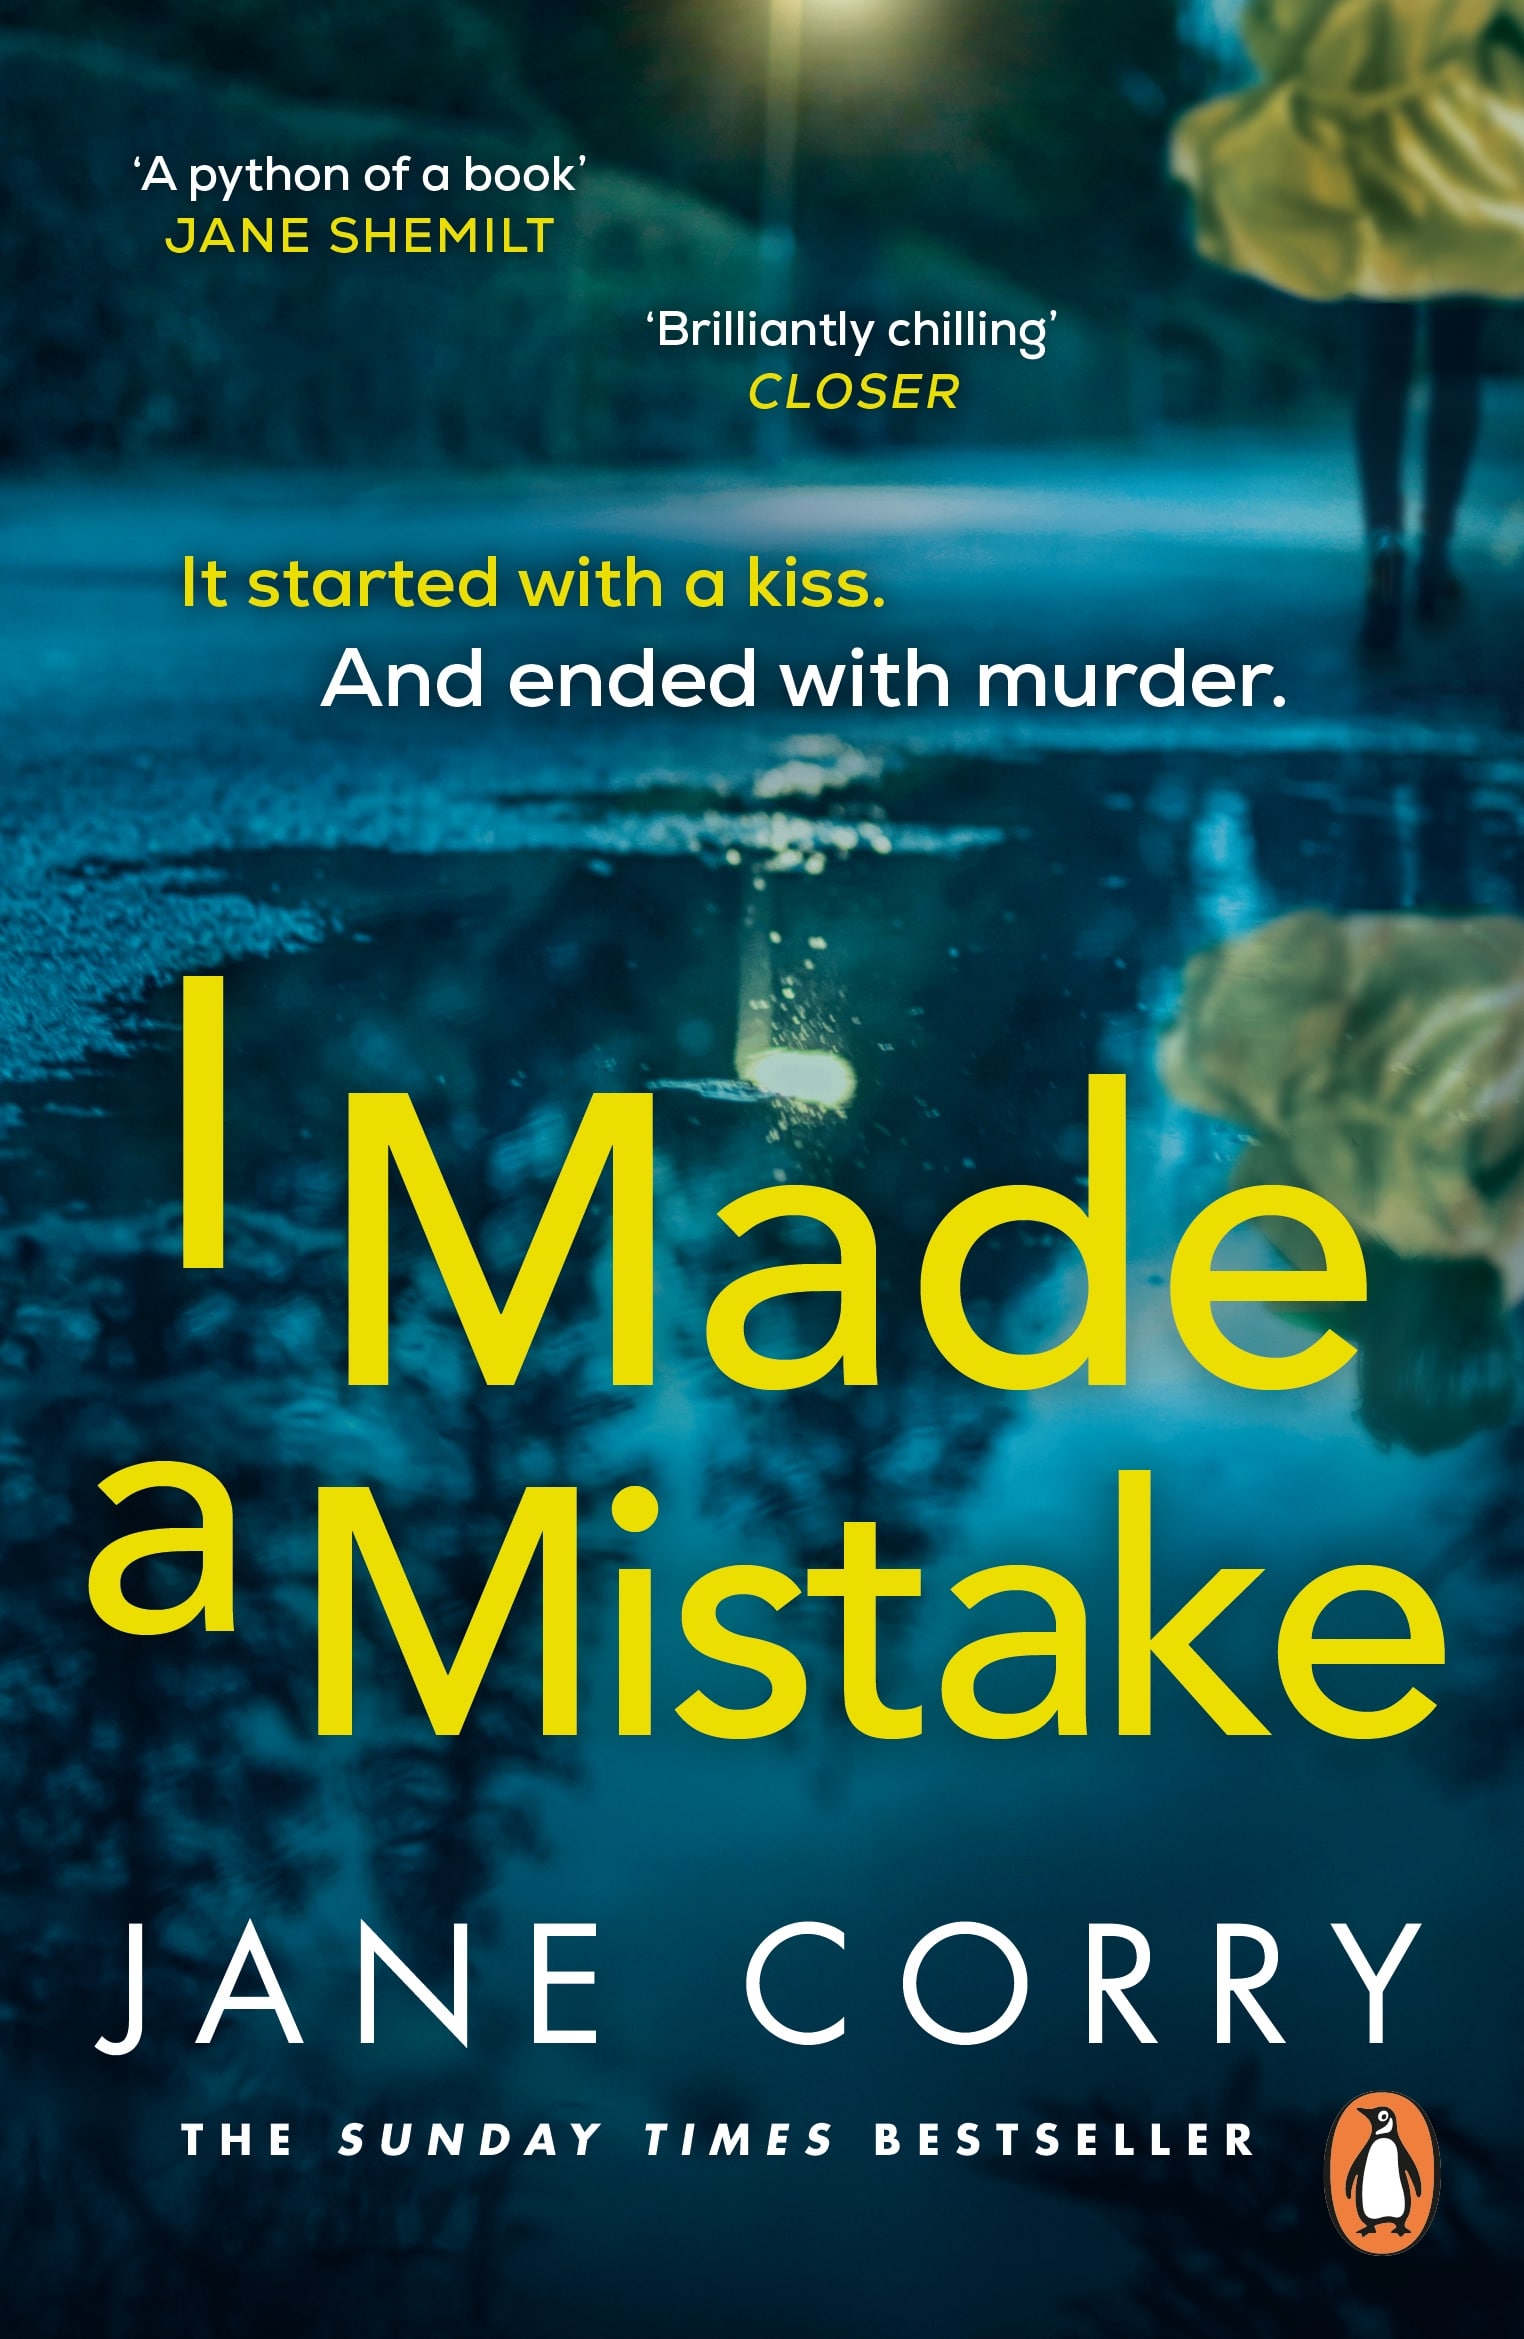 i made a mistake by jane corry, one of the best books out in may 2020